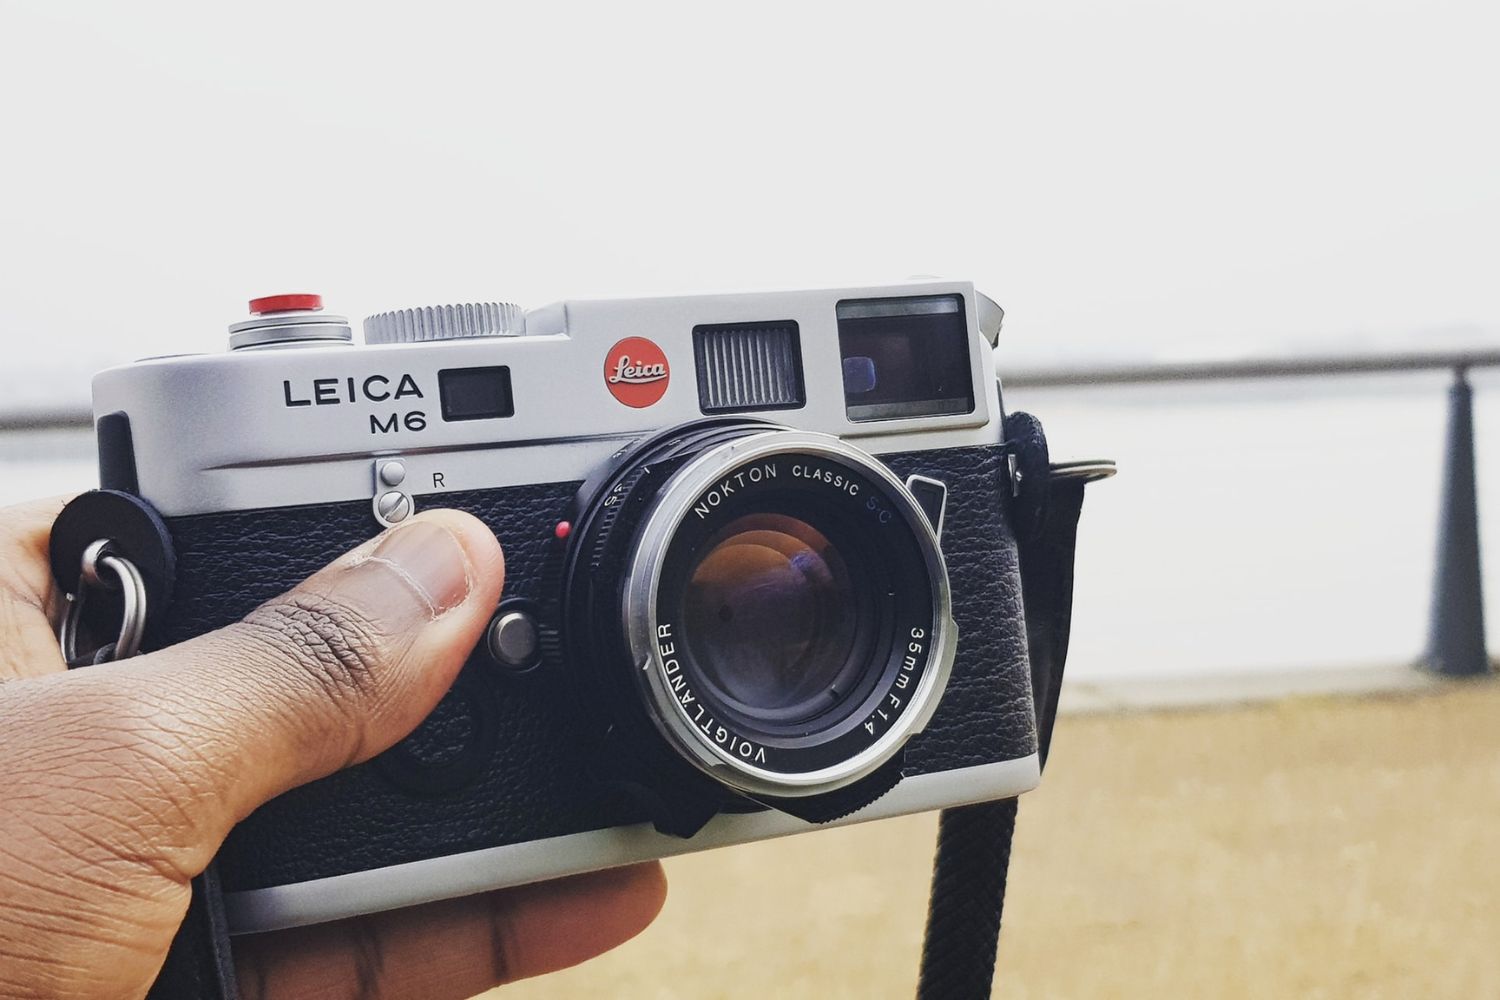 What Makes Leica M6 Popular and Worth the Hype?